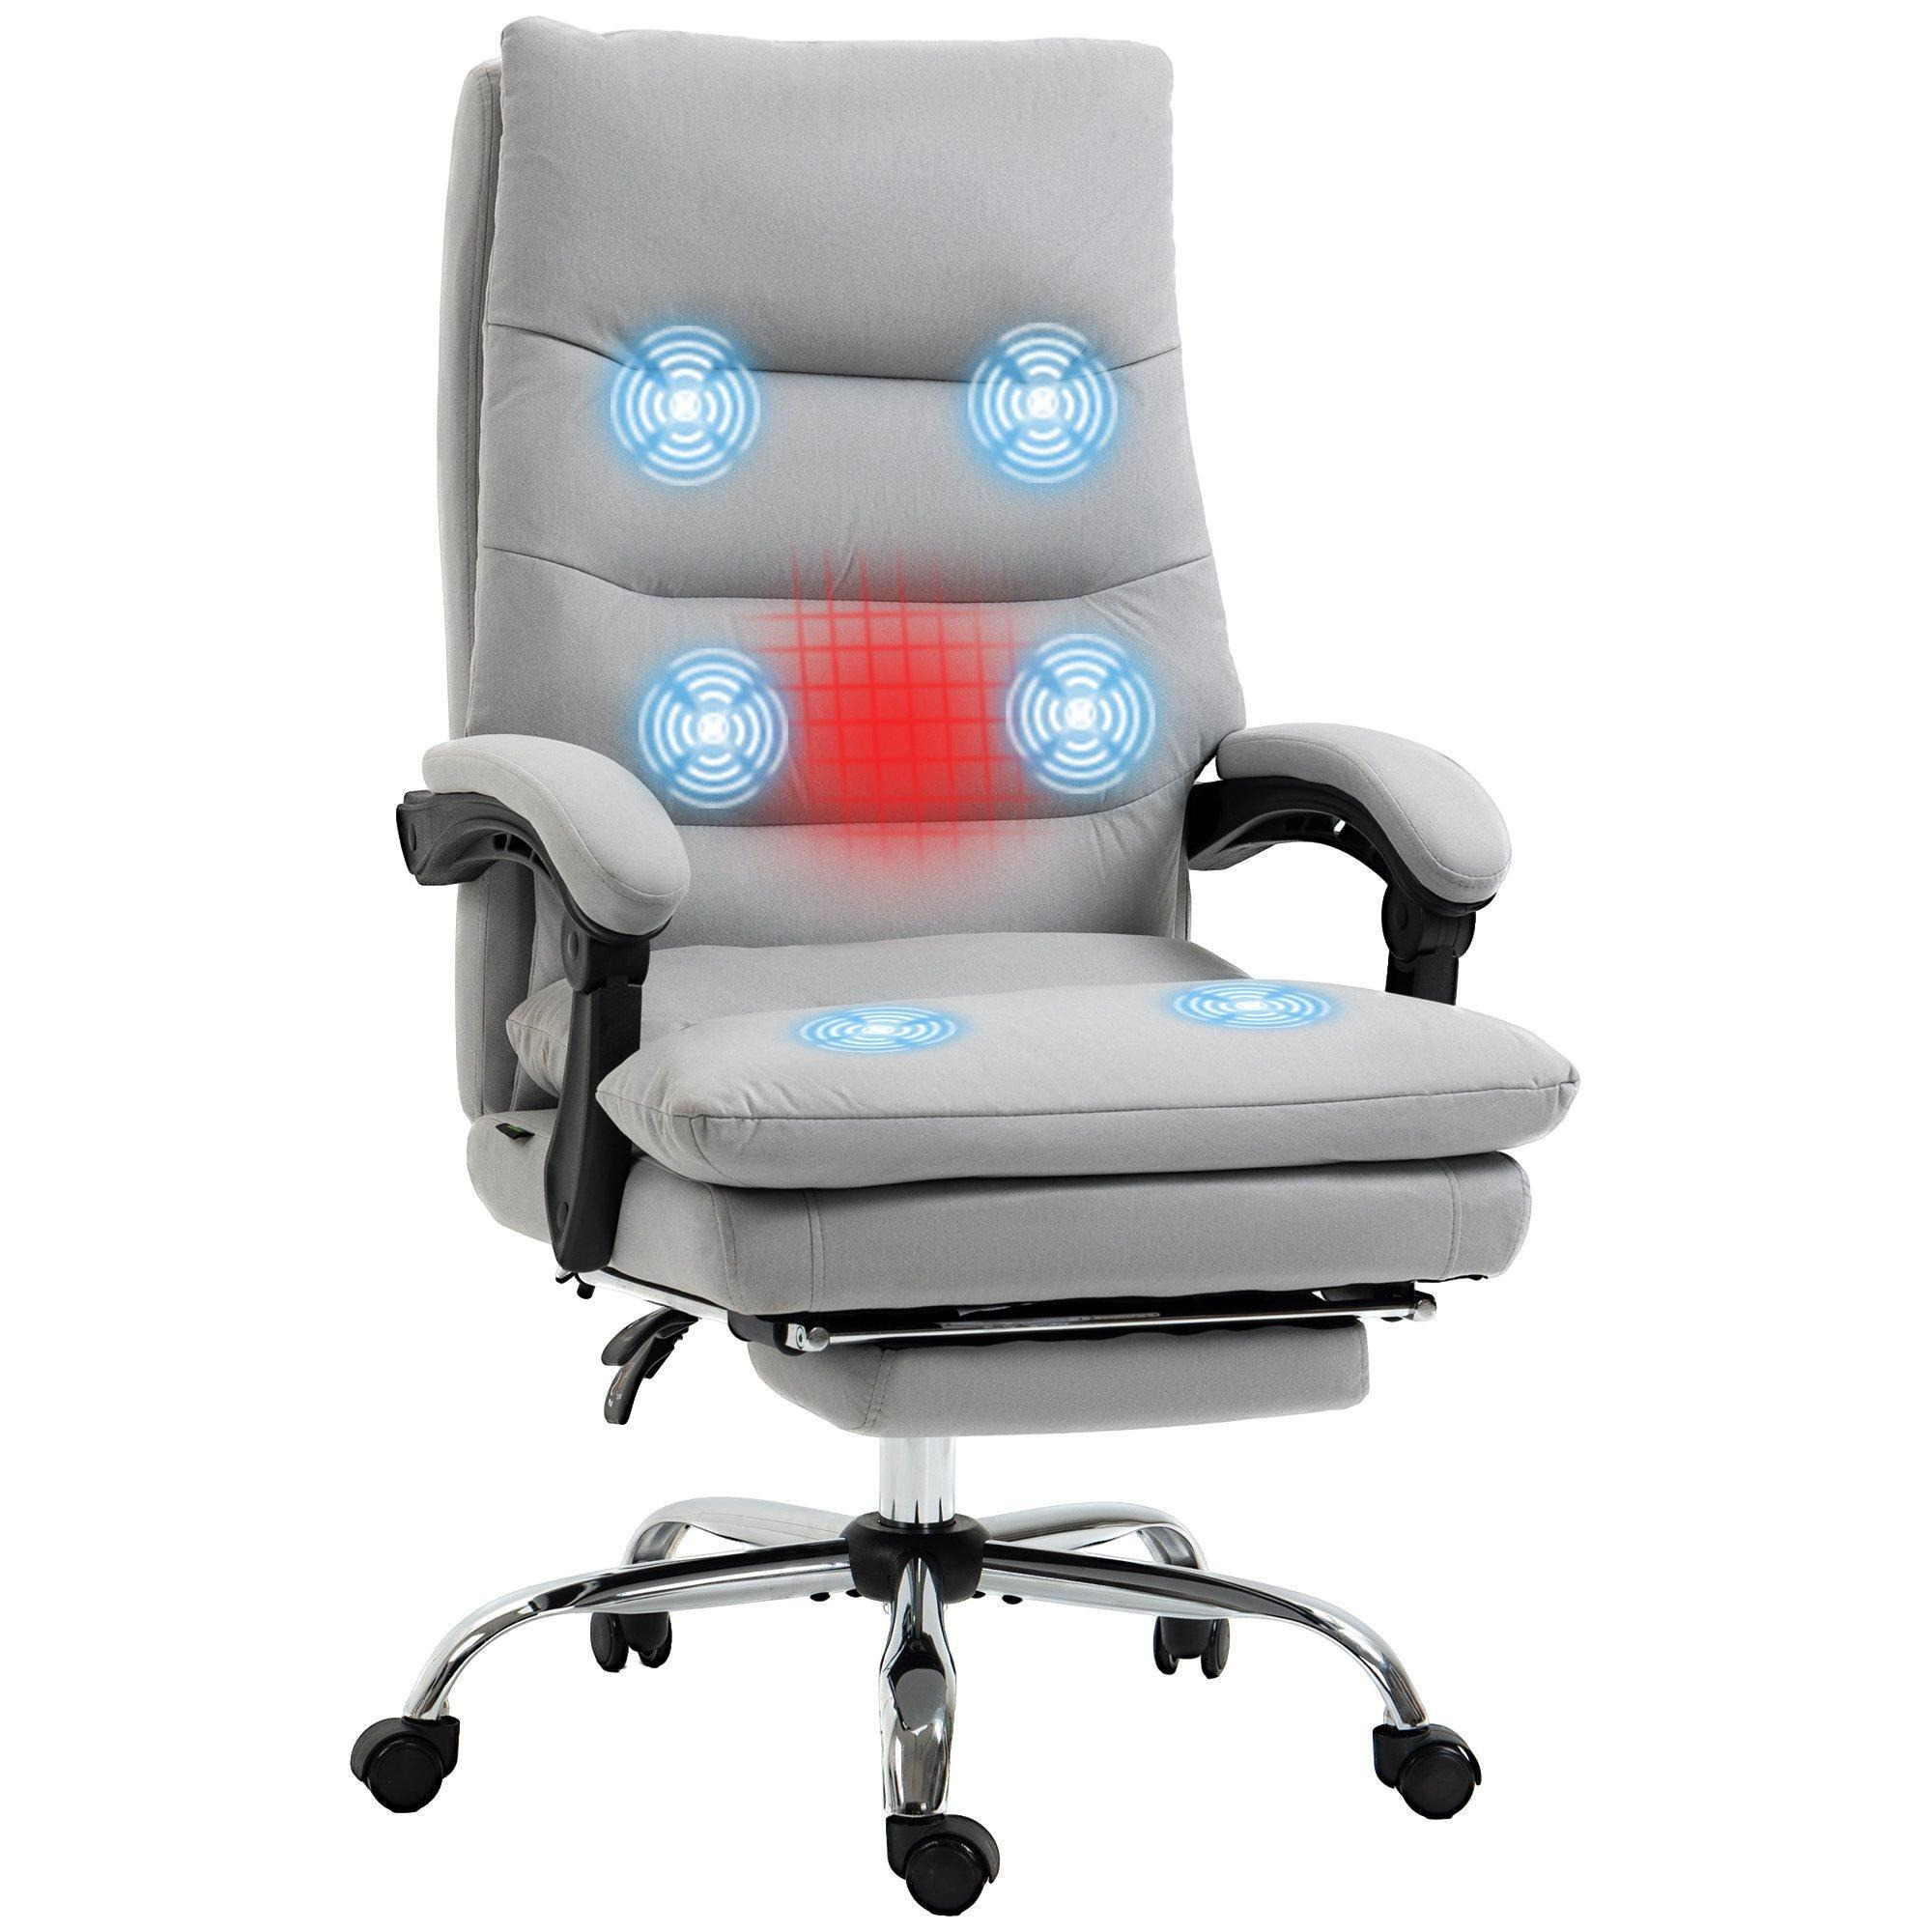 Microfibre Executive Office Chair with Vibration Massage and Heat - image 1